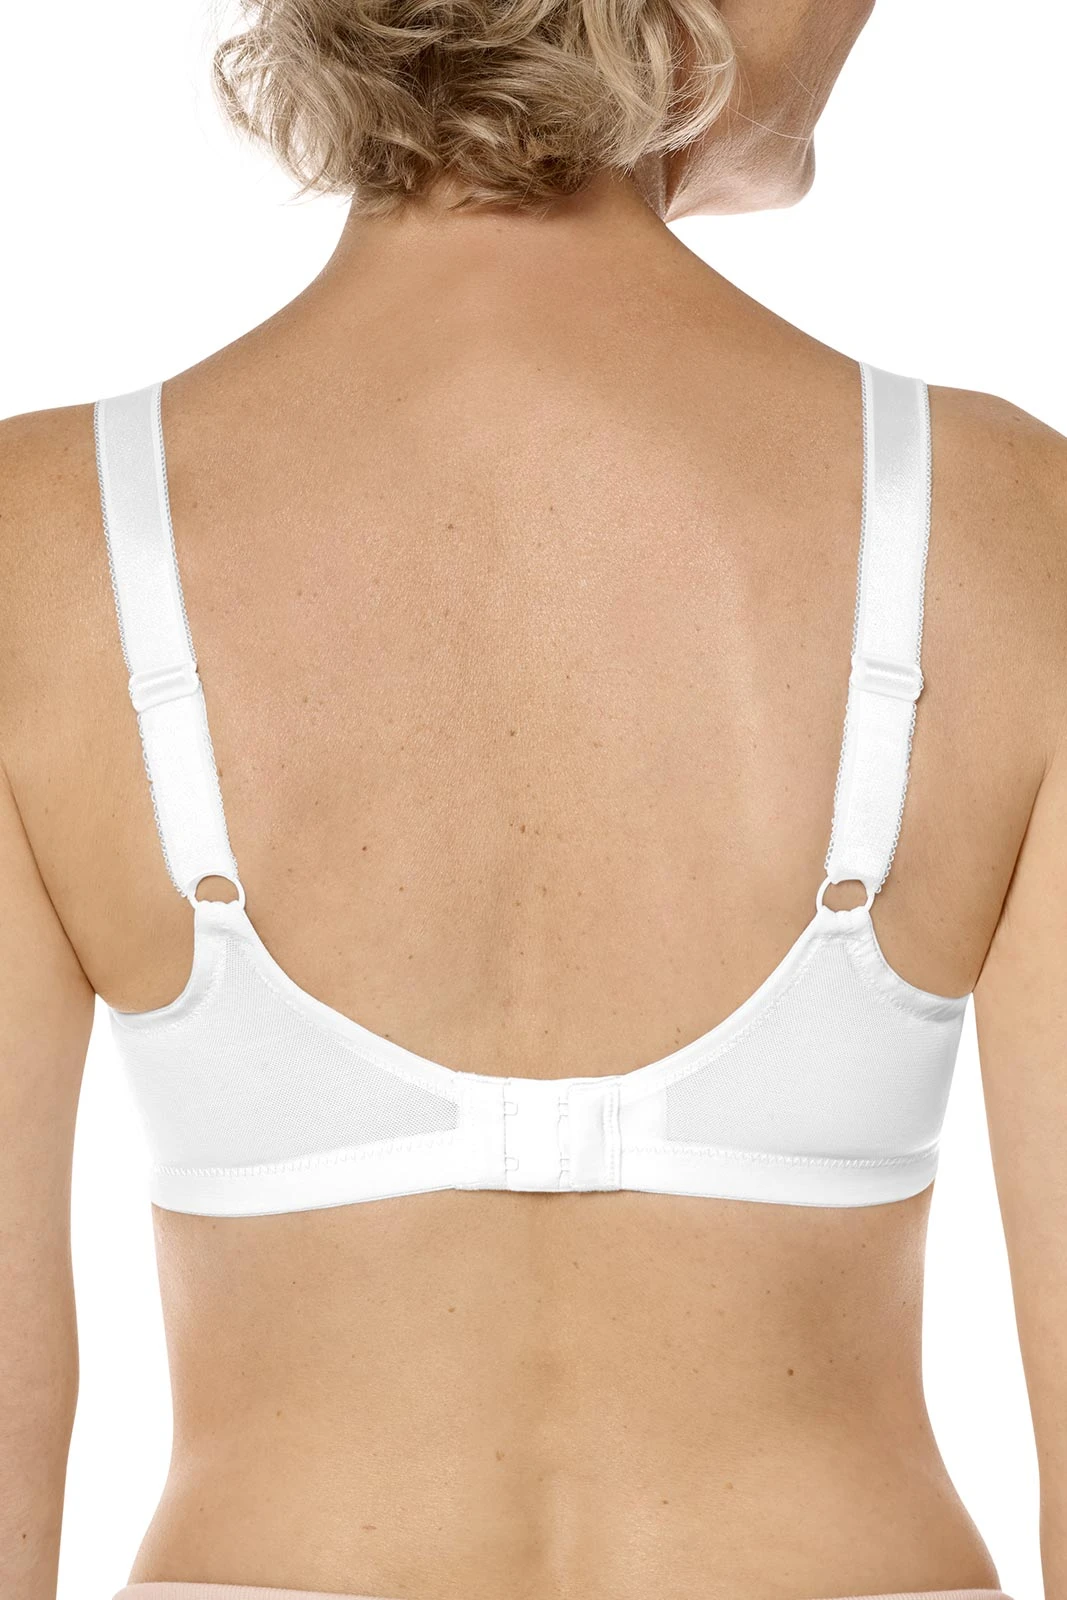 Amoena Performance Sports Bra, Soft Cup, with Adjustable Strap, Size 36AA,  White Ref# 5265436AAWH KU54109320-Each